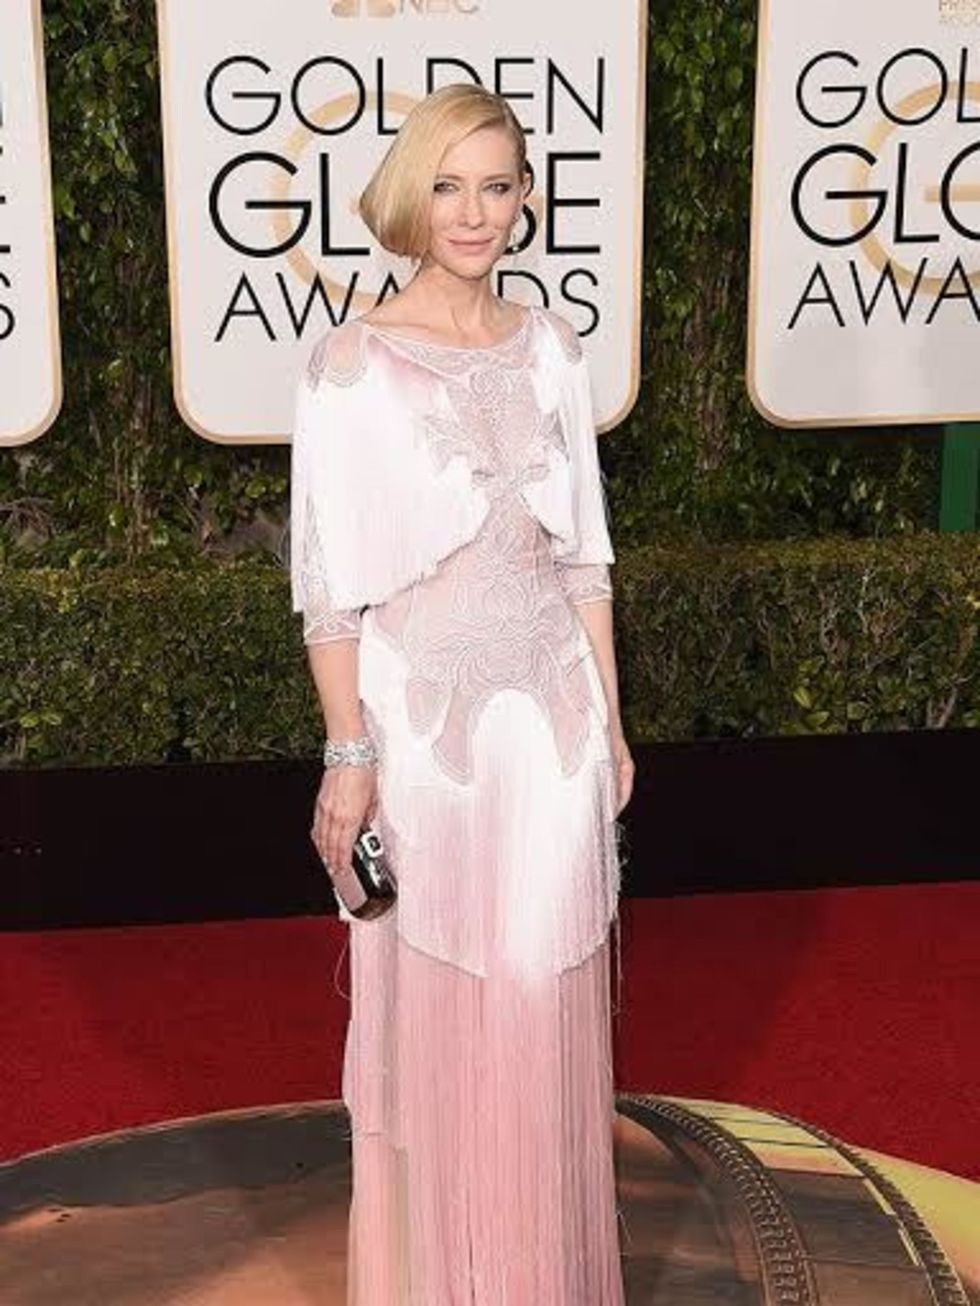 <p>Cate Blanchett in Givenchy Couture by Riccardo Tisci: This is nothing short of perfection. The vintage detailing, the antique ivory shade, the exquisite Tisci signature fringing and embroidery. Cate oozes Golden Age Hollywood glamour in this gown.  <